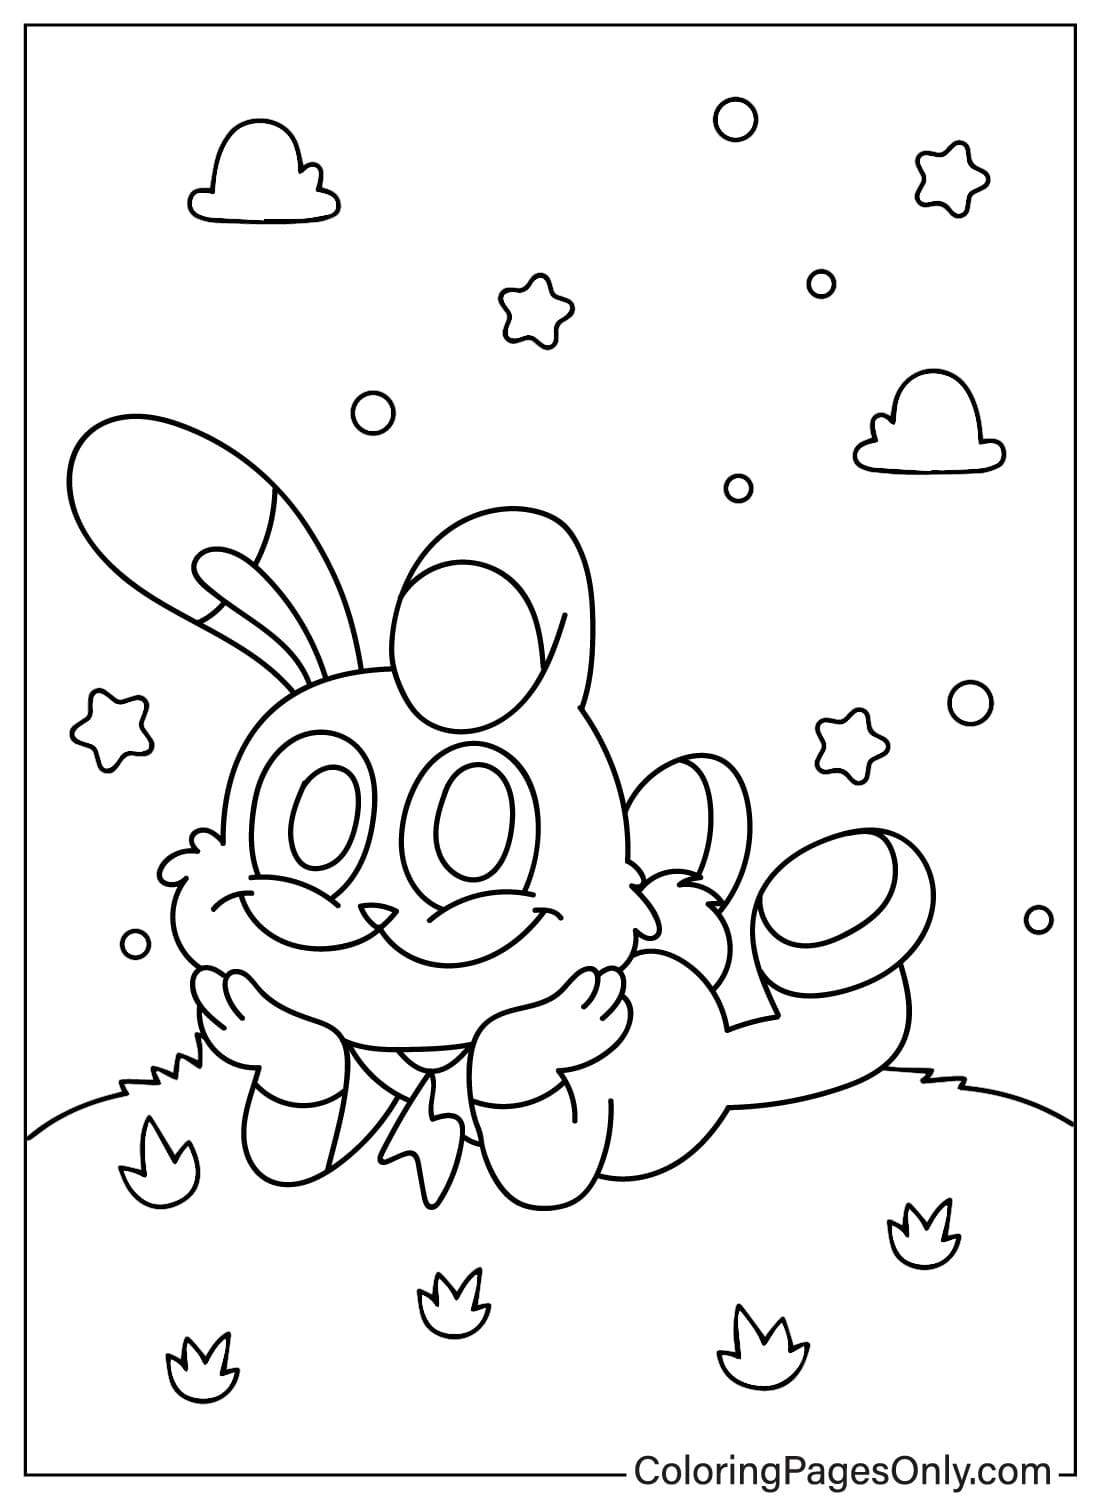 Pictures Hoppy Hopscotch Coloring Page from Hoppy Hopscotch